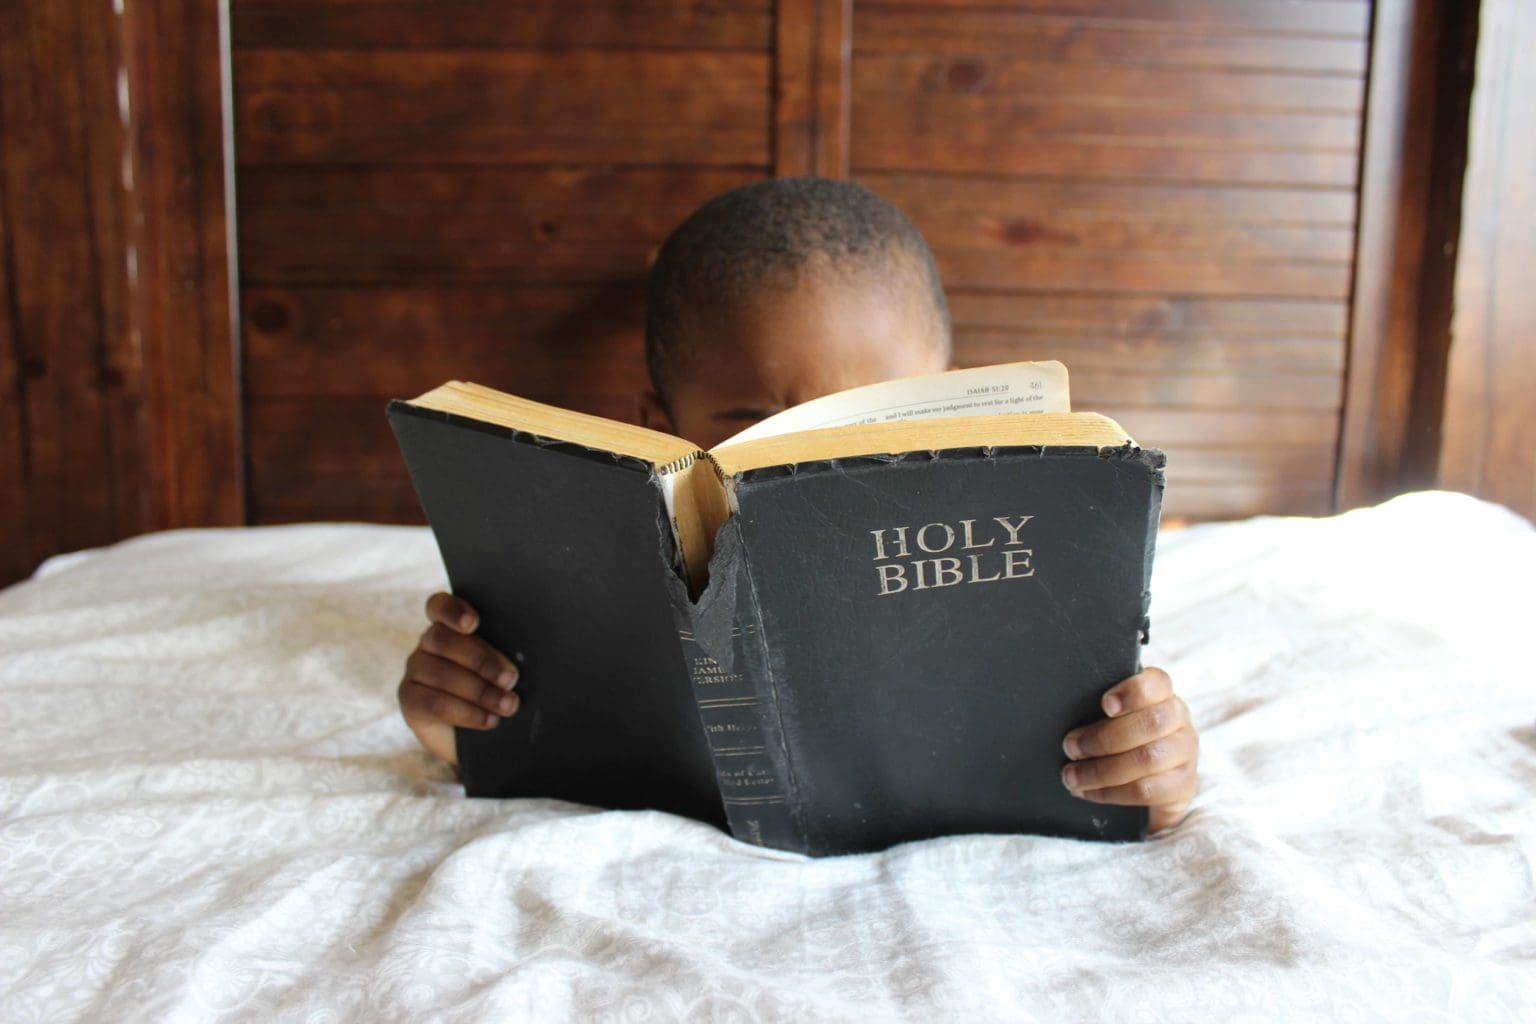 Sharing the Gospel with Your Child